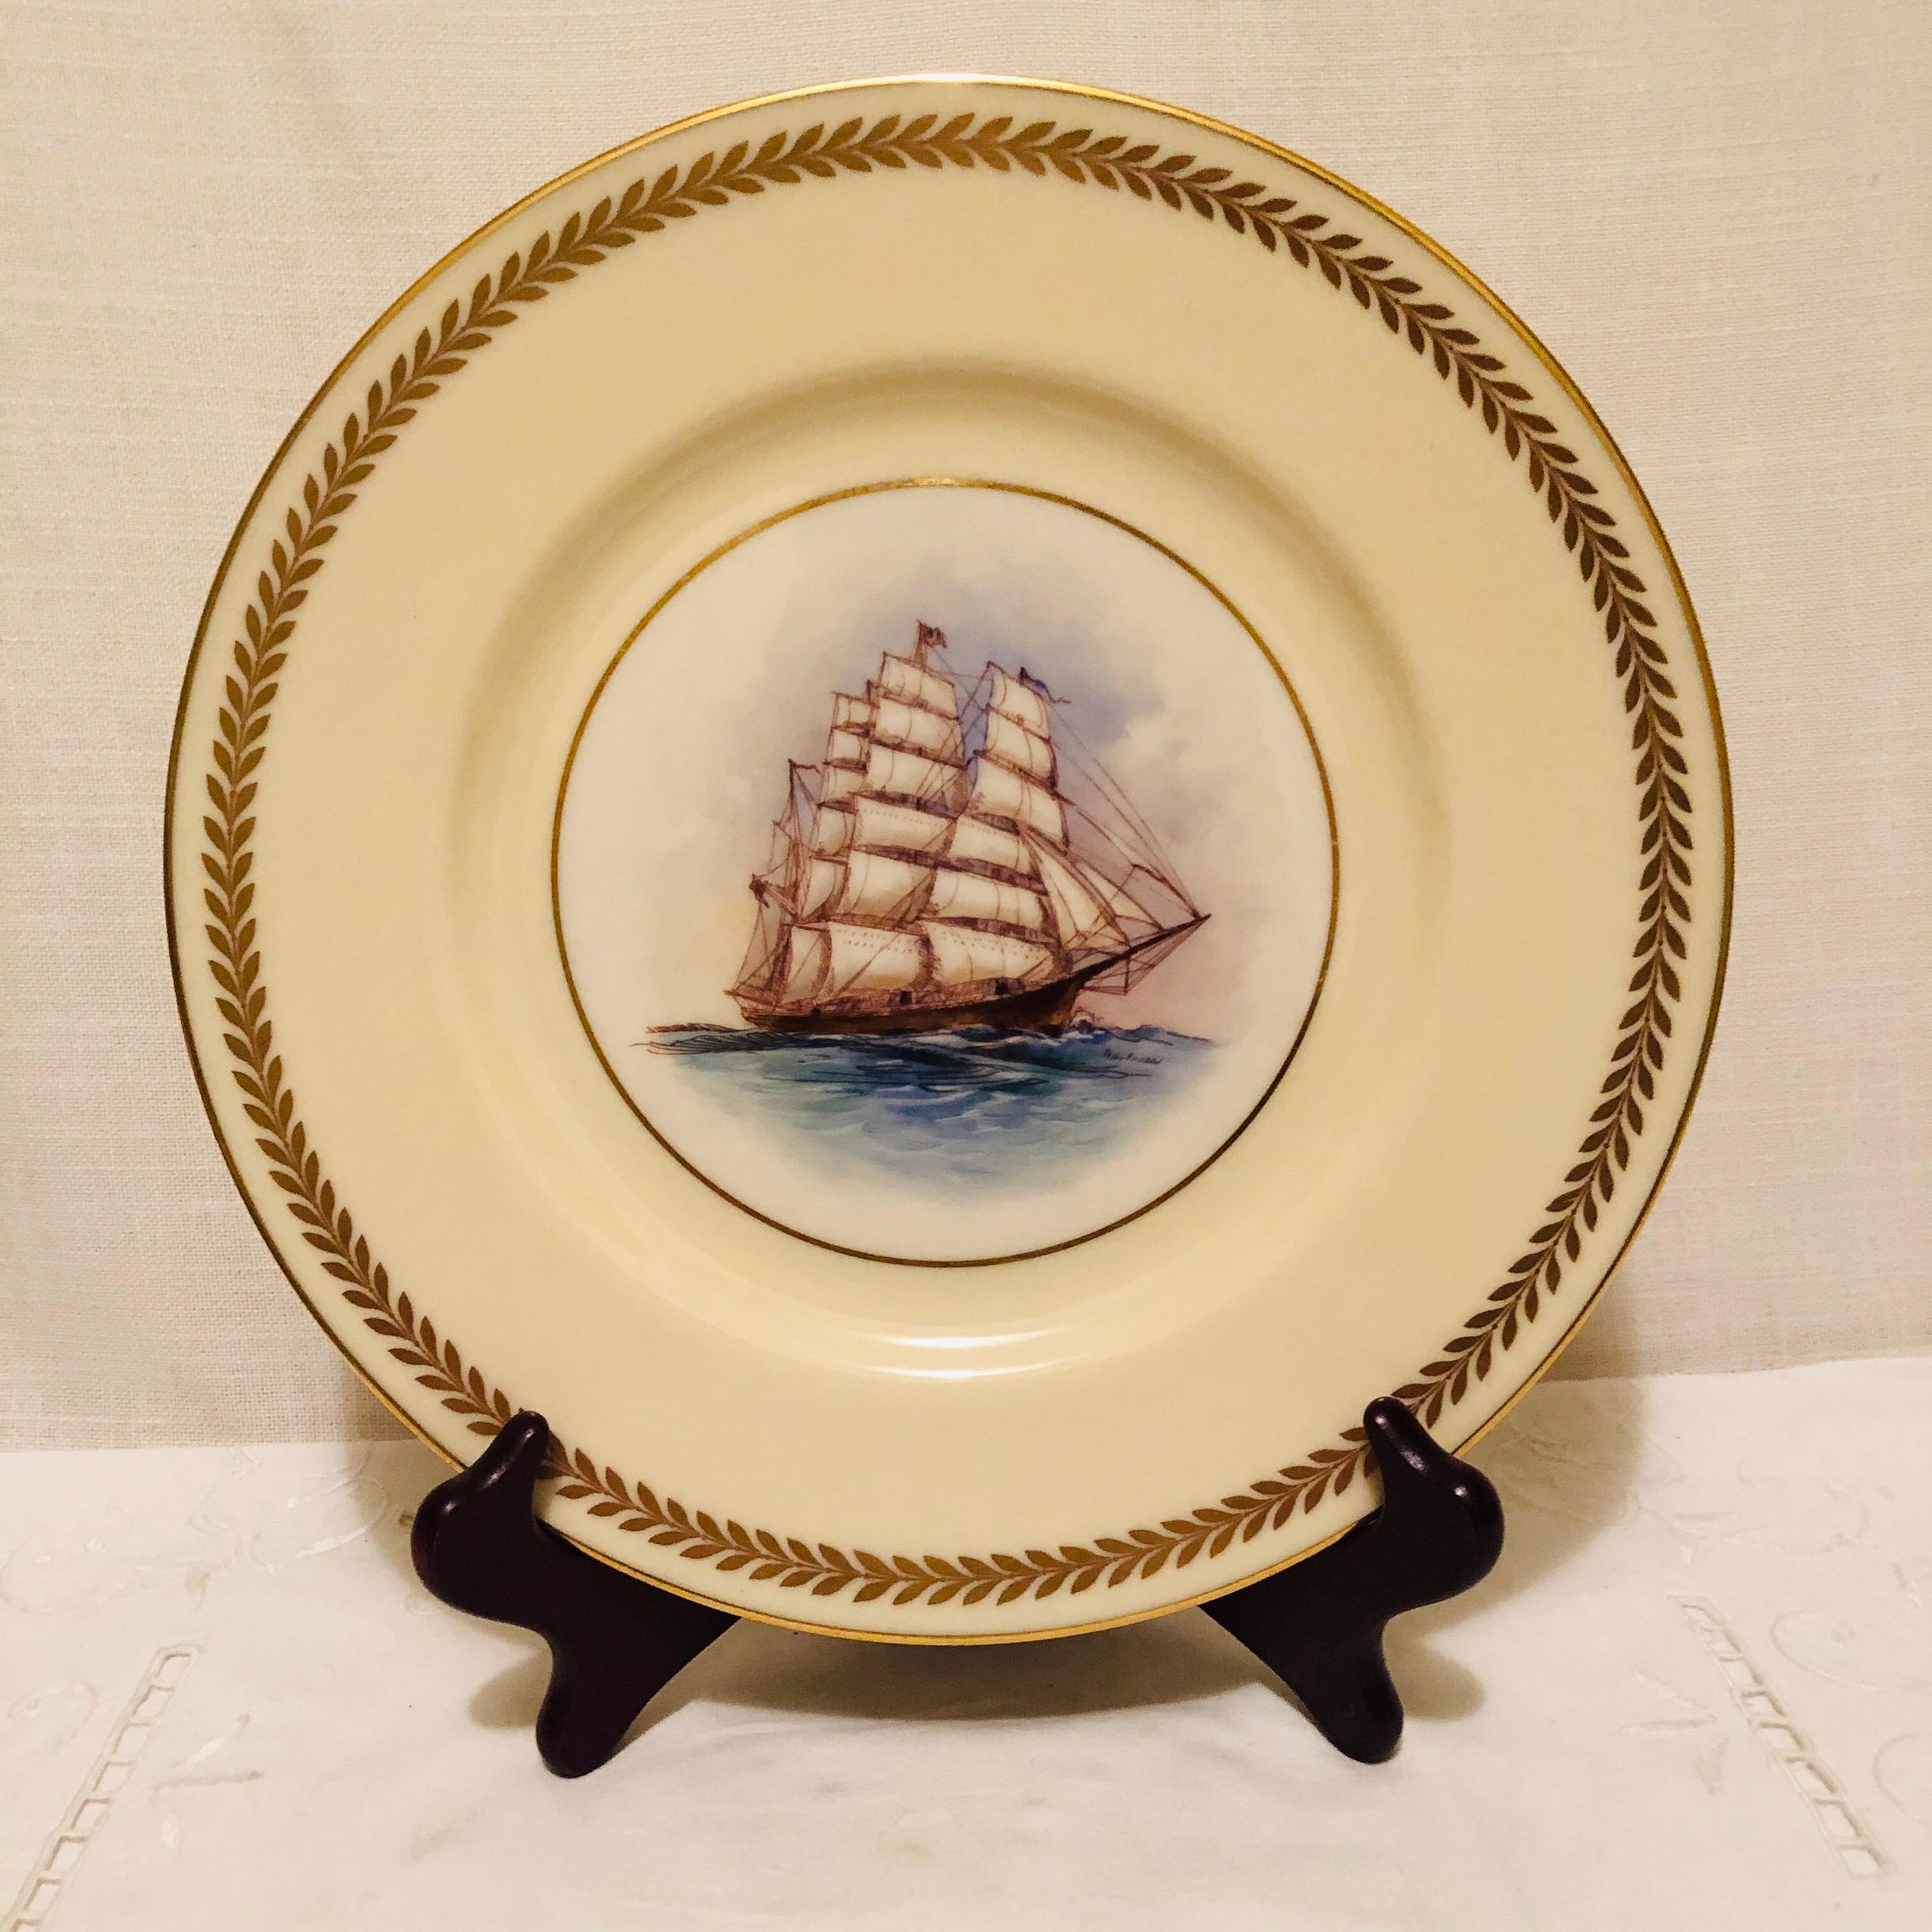 Set of twelve Lenox dinner plates each hand painted with a different tall ship and Artist-signed. The paintings of the tall ships on the ocean are very finely painted, and they would rival other marine paintings you may see. They would be a